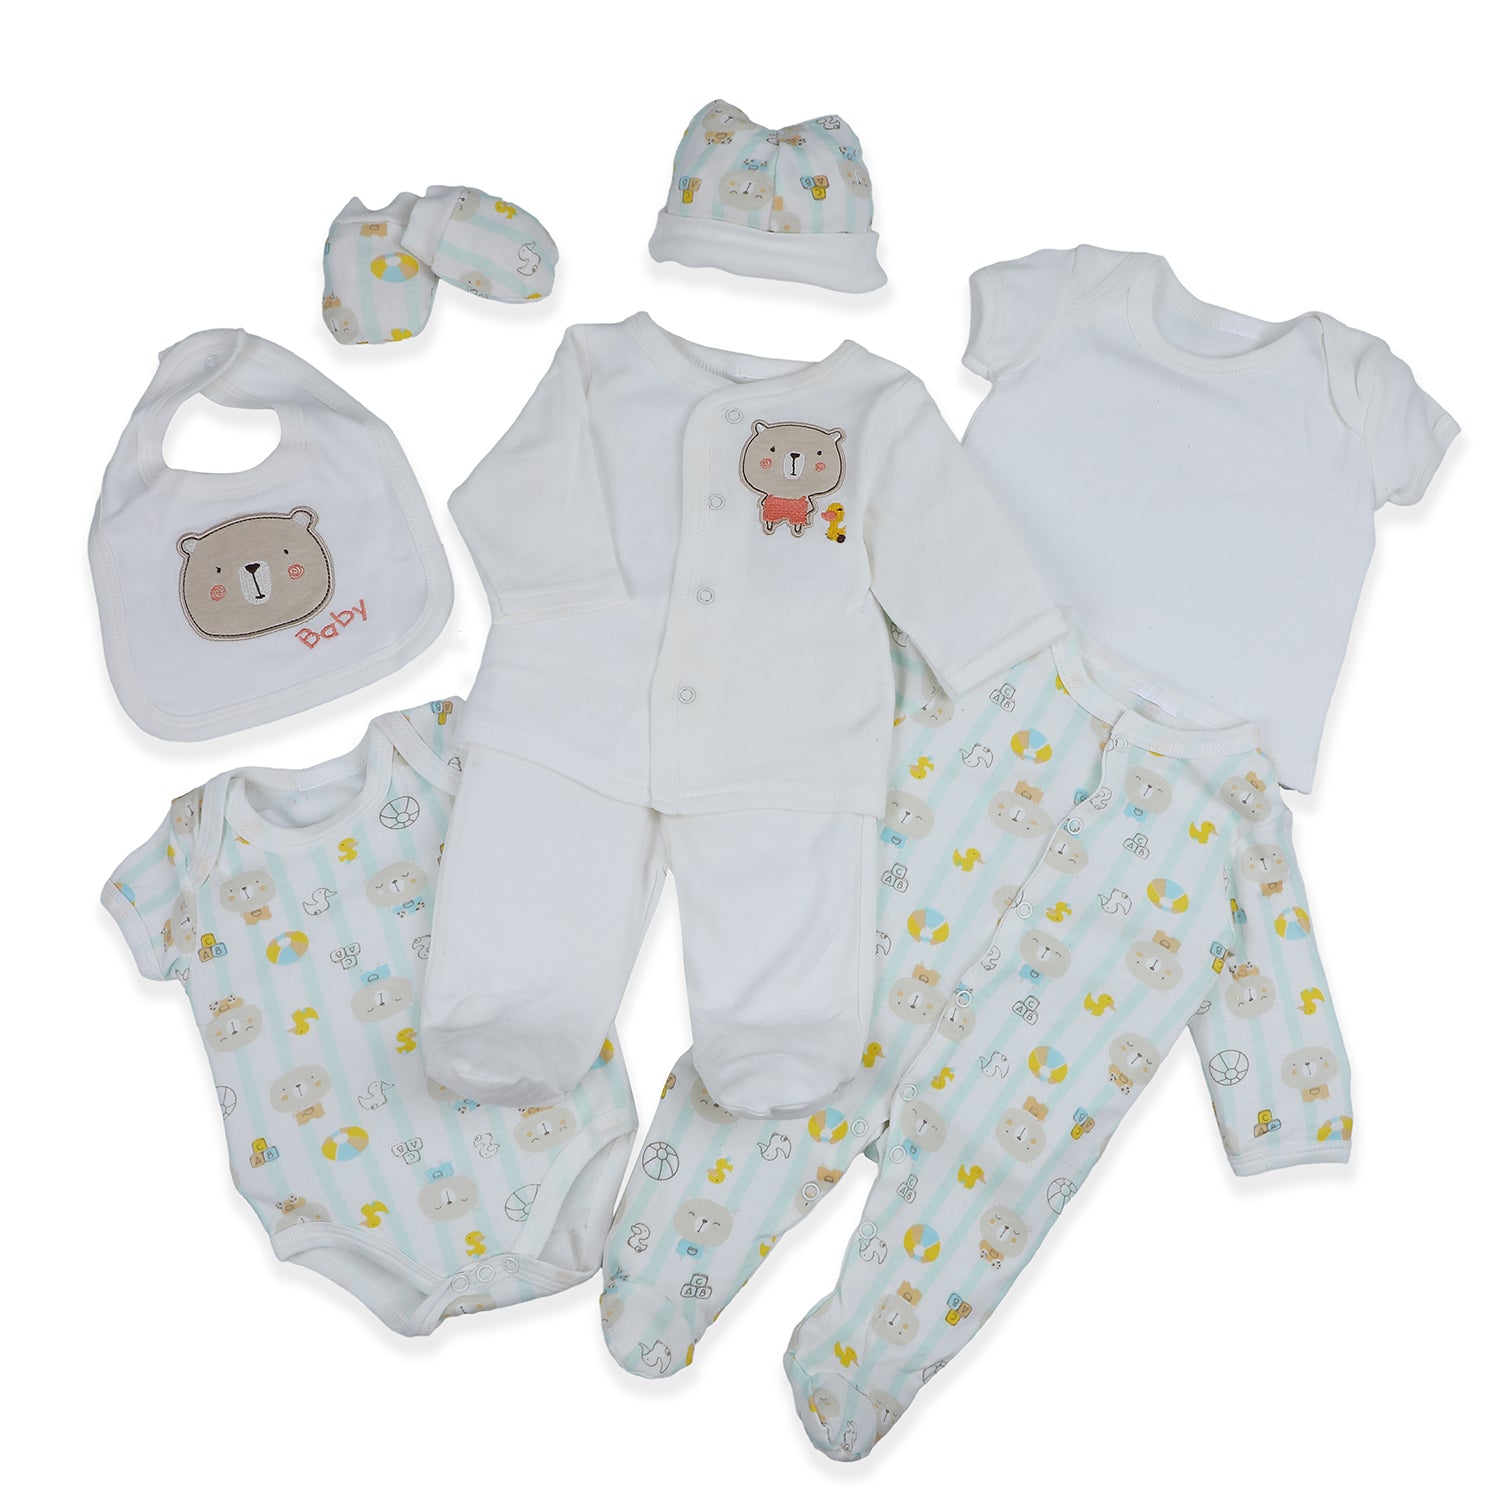 Baby Moo Cute Animal Embroidered Cotton Infant Essentials 8 pcs Romper Gift Set - White - Baby Moo